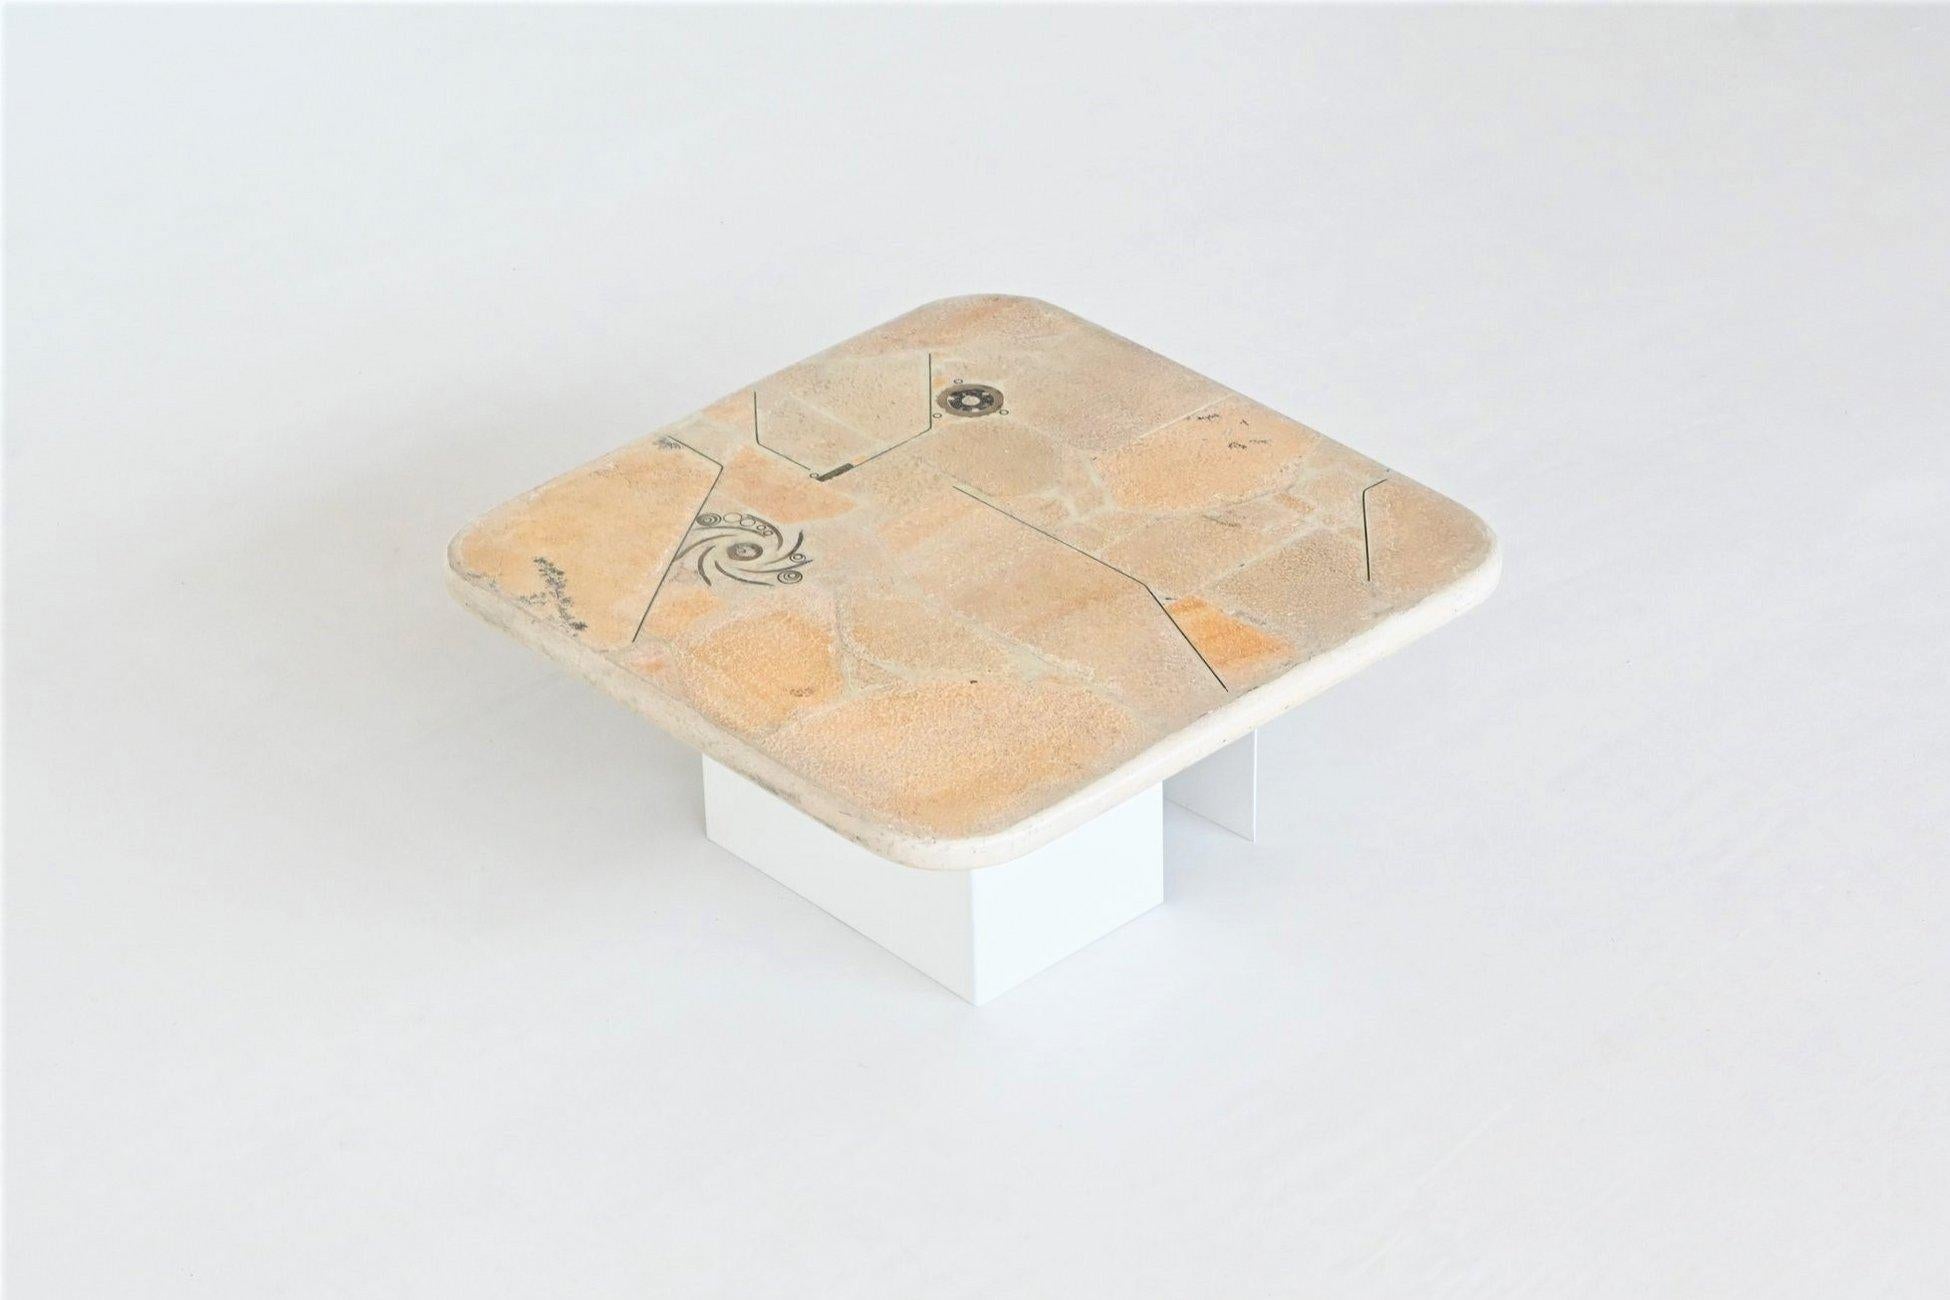 Beautiful square shaped coffee table designed and made by Marcus Kingma, The Netherlands 1992. The heavy white concrete top rests on a base of two off white lacquered metal bases that can be placed in several positions. Beautiful composition of